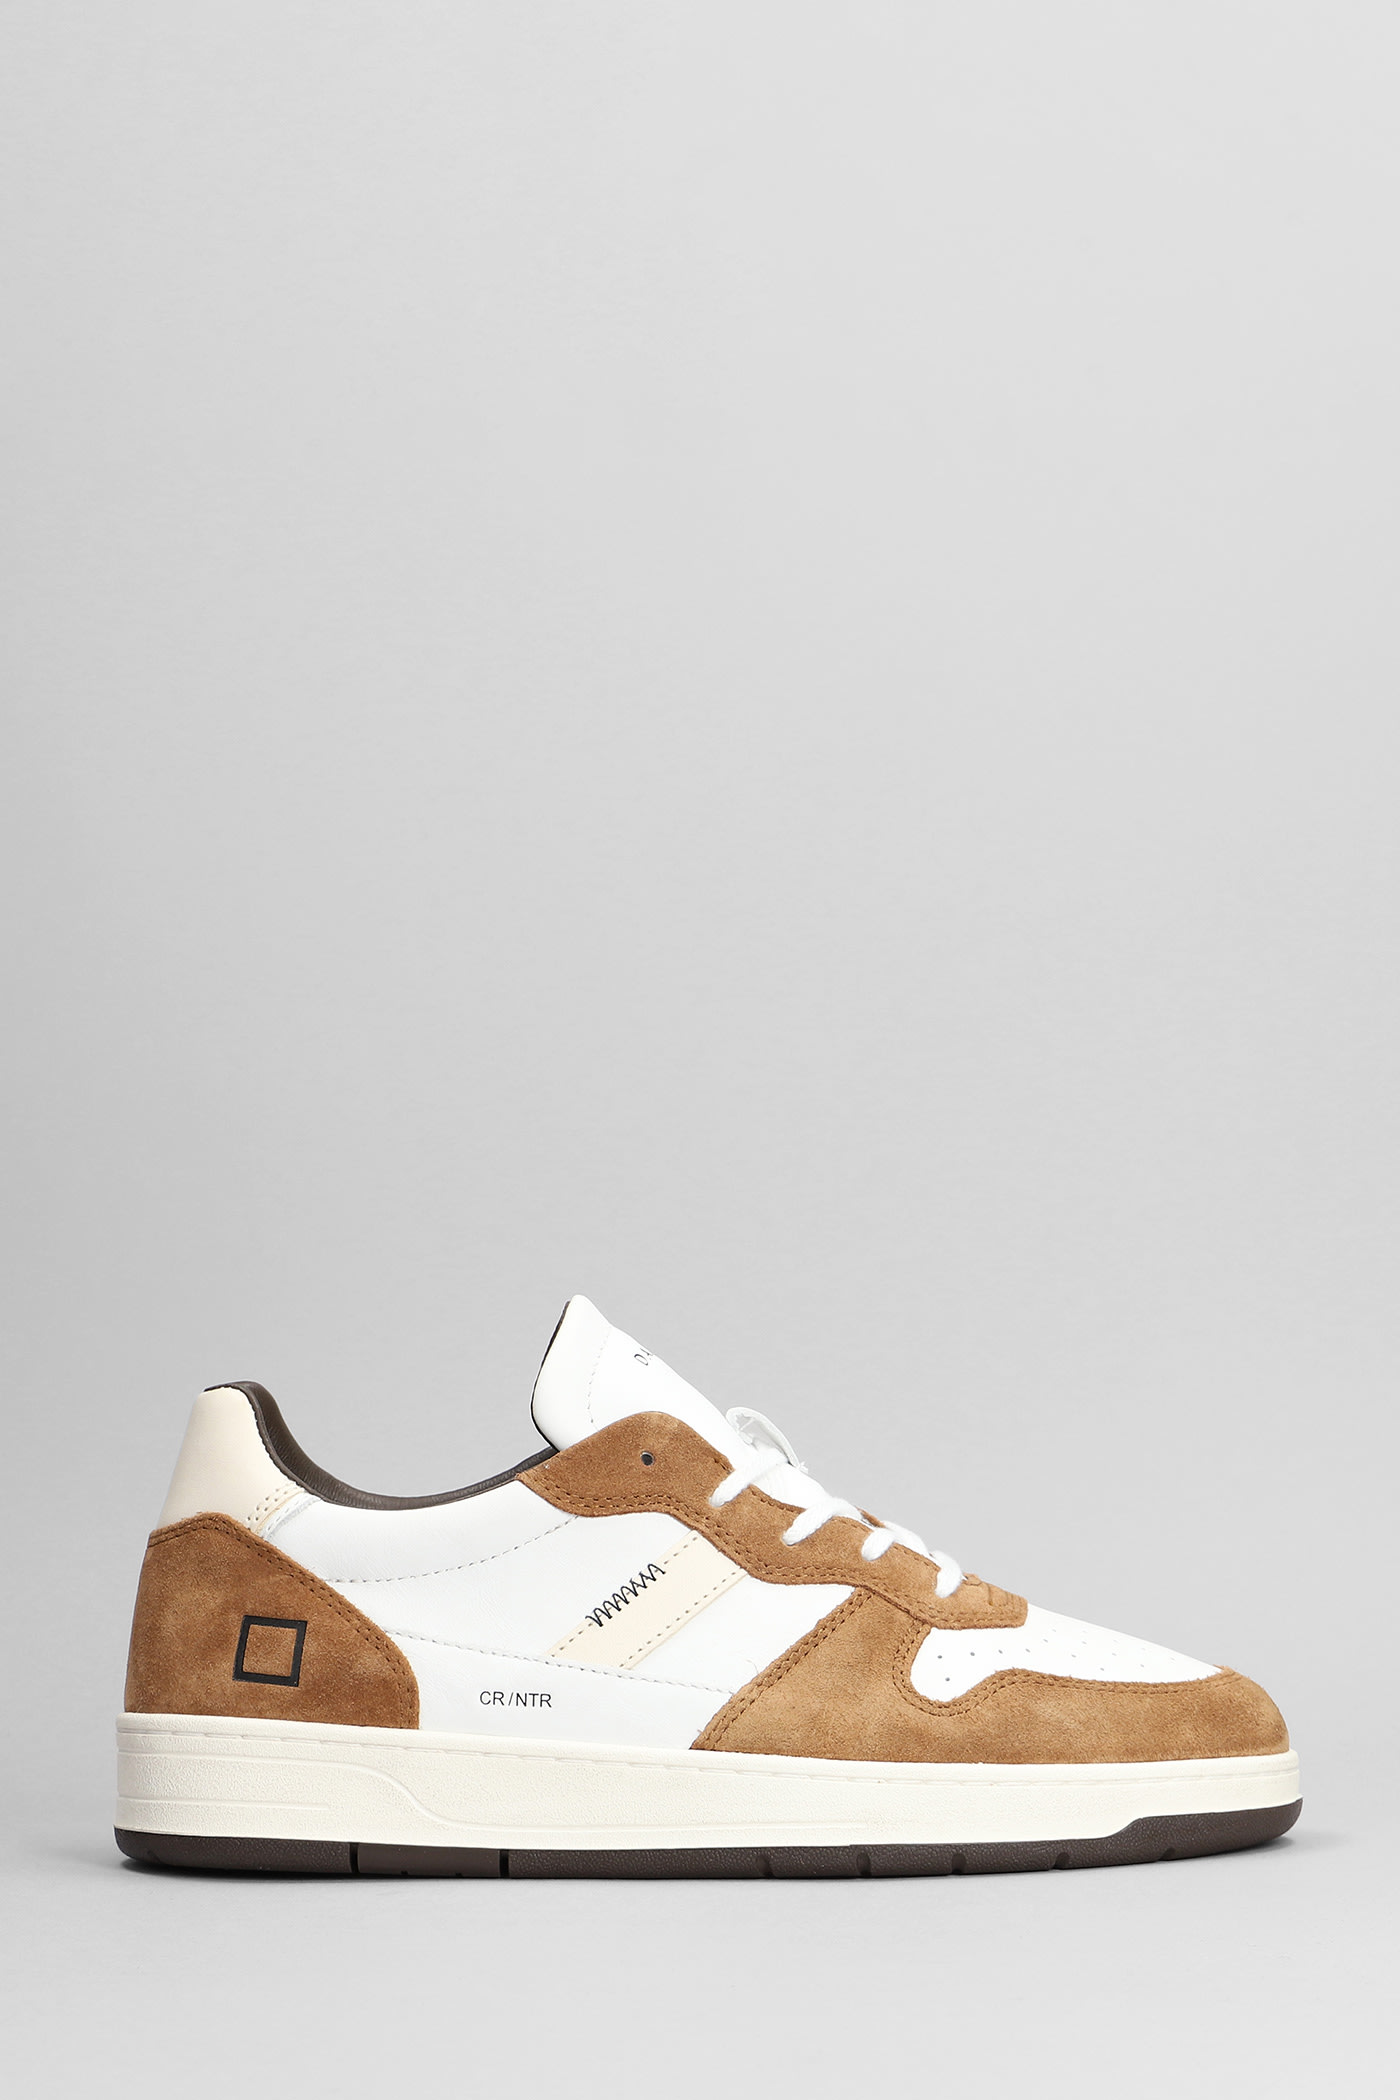 DATE COURT 2.0 SNEAKERS IN LEATHER COLOR SUEDE AND LEATHER